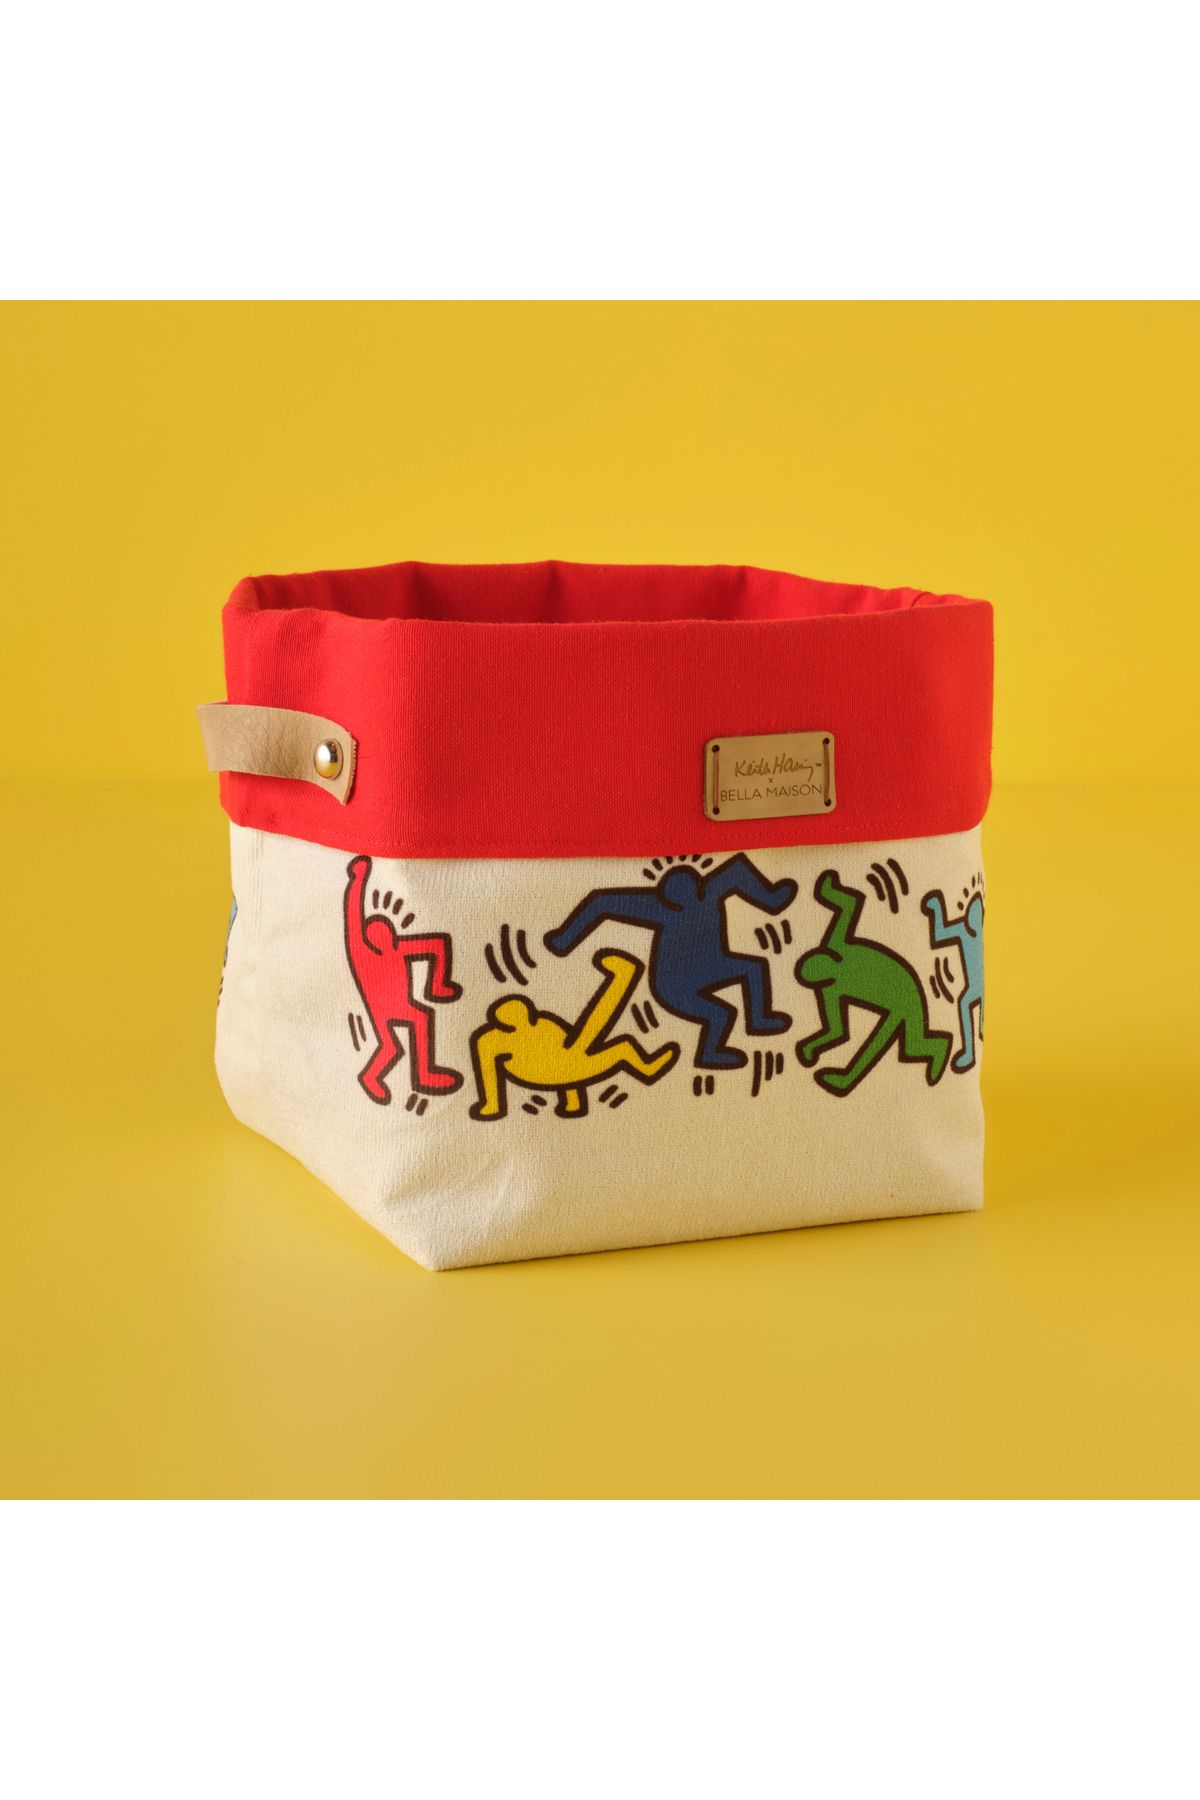 Bella Maison Keith Haring Colored Organizer Sepet (22x18 cm)